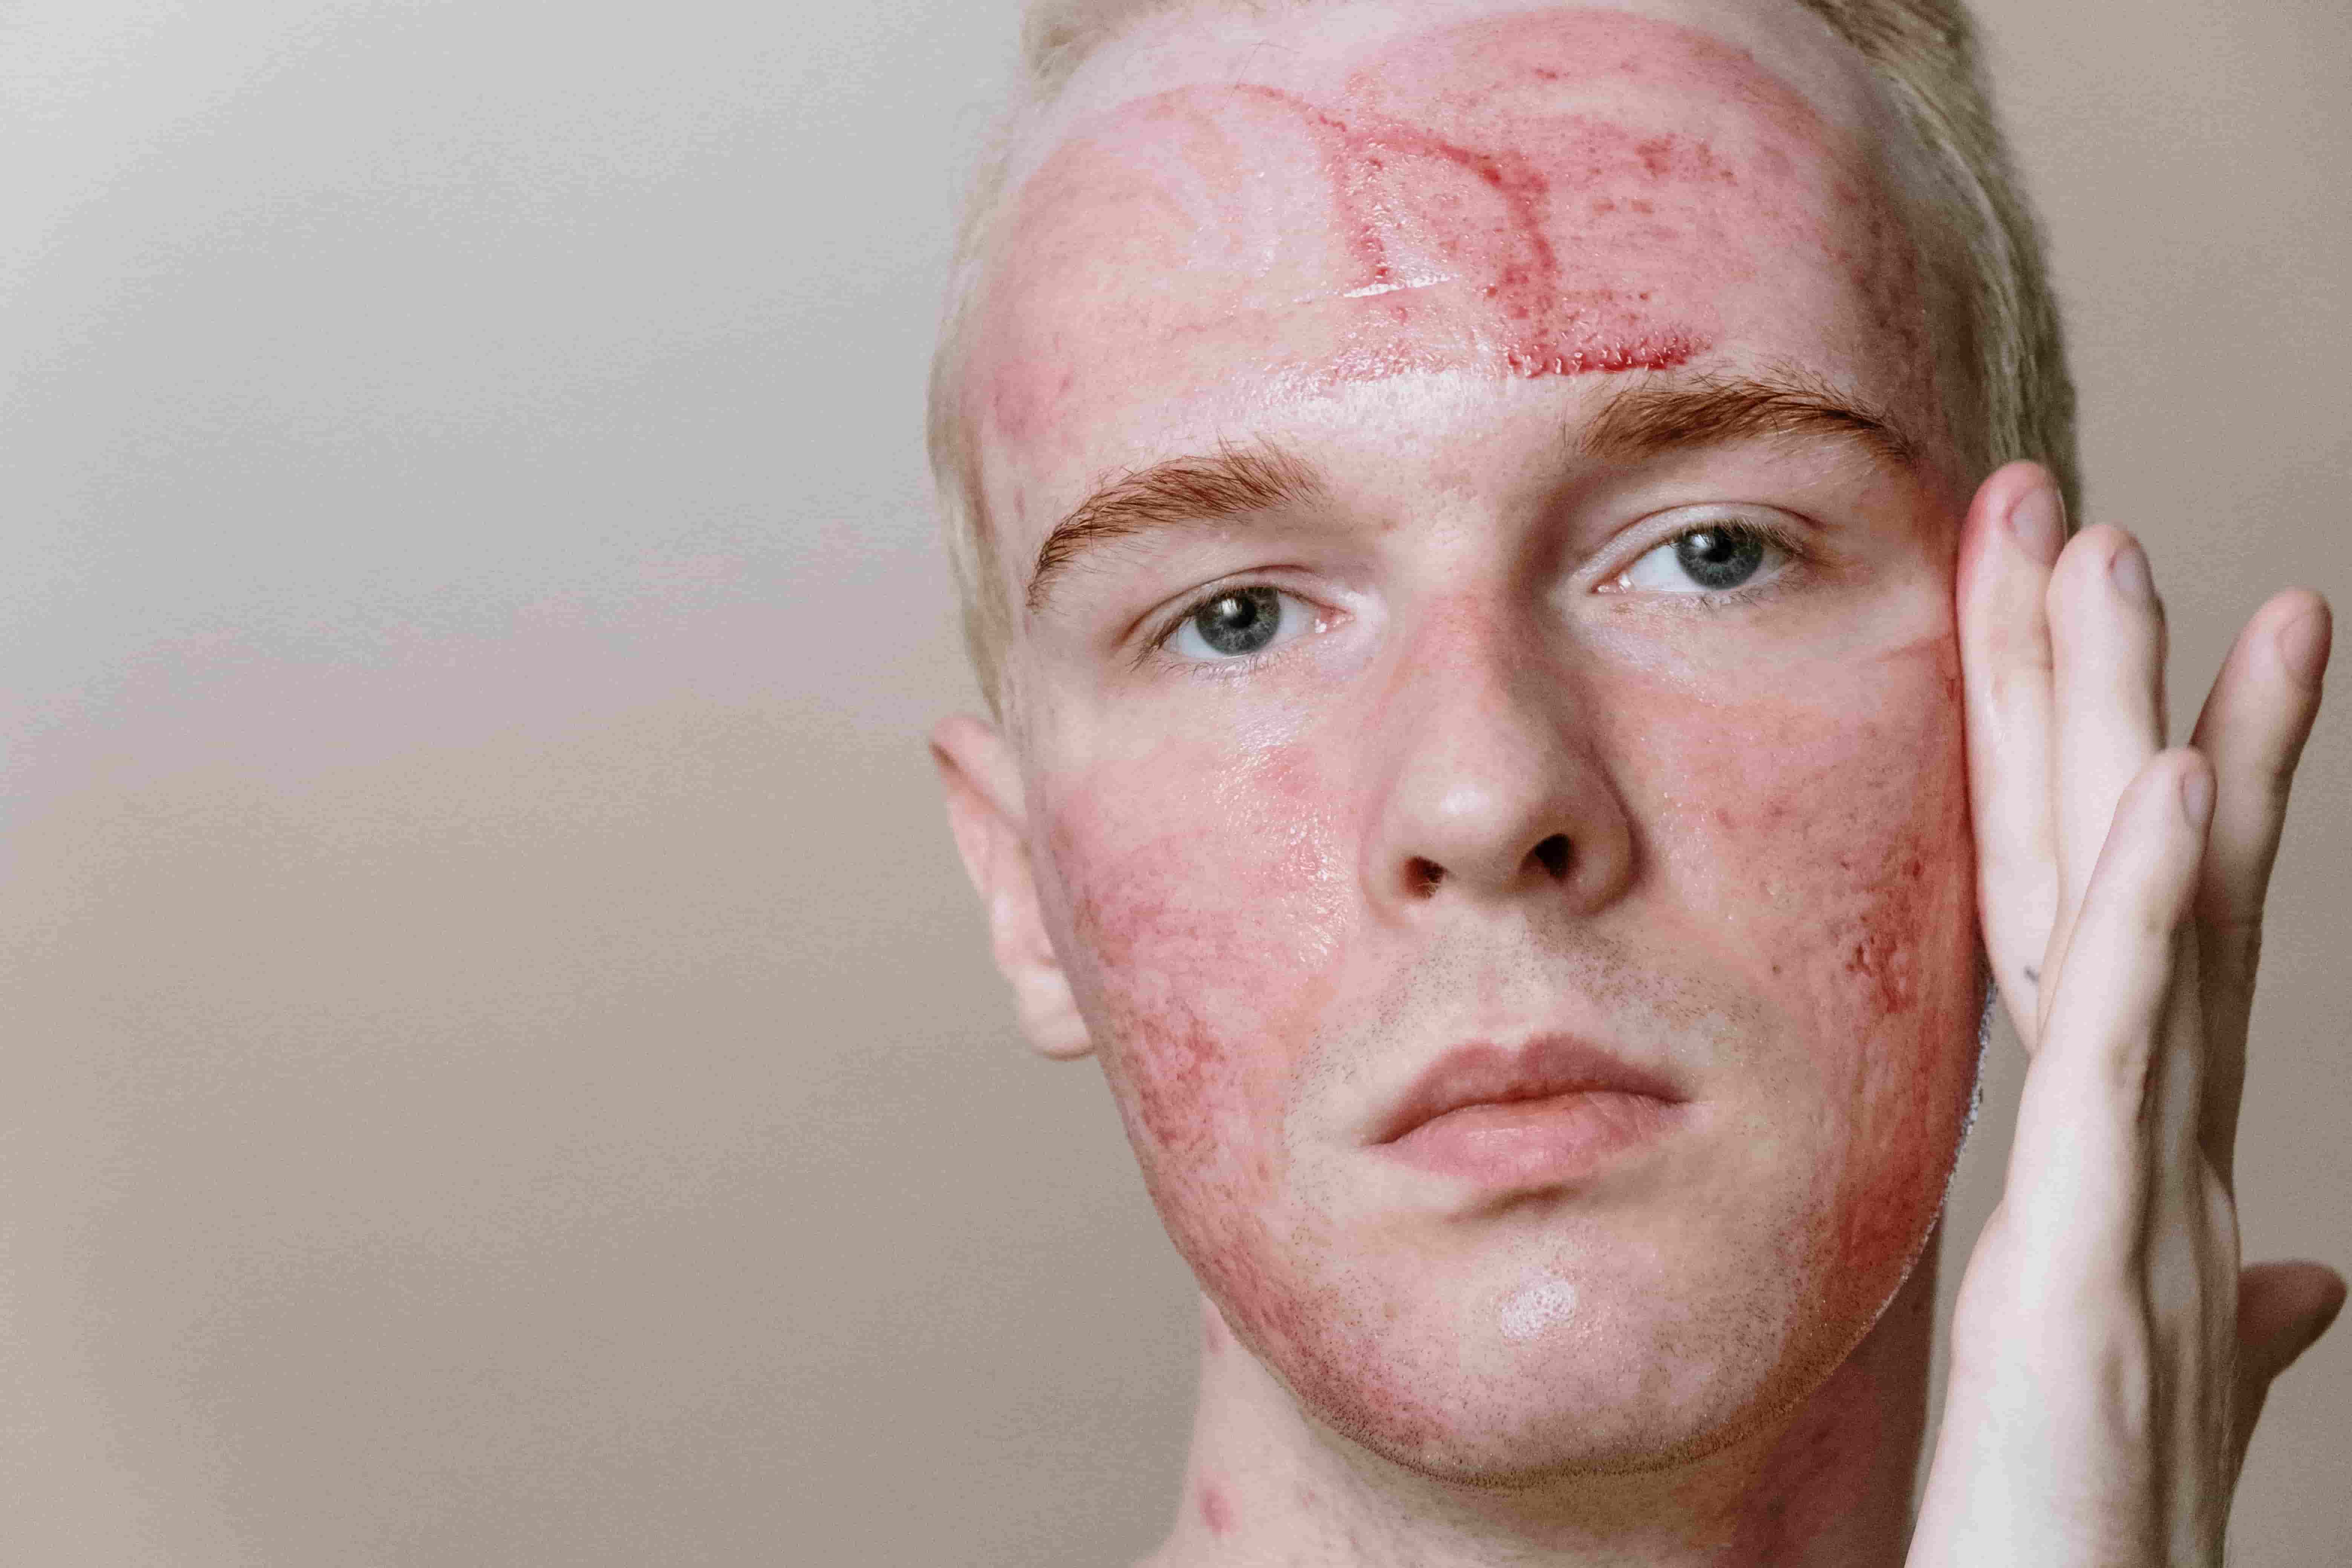 Acne Rosacea is a type that usually occurs with fair-skinned people.